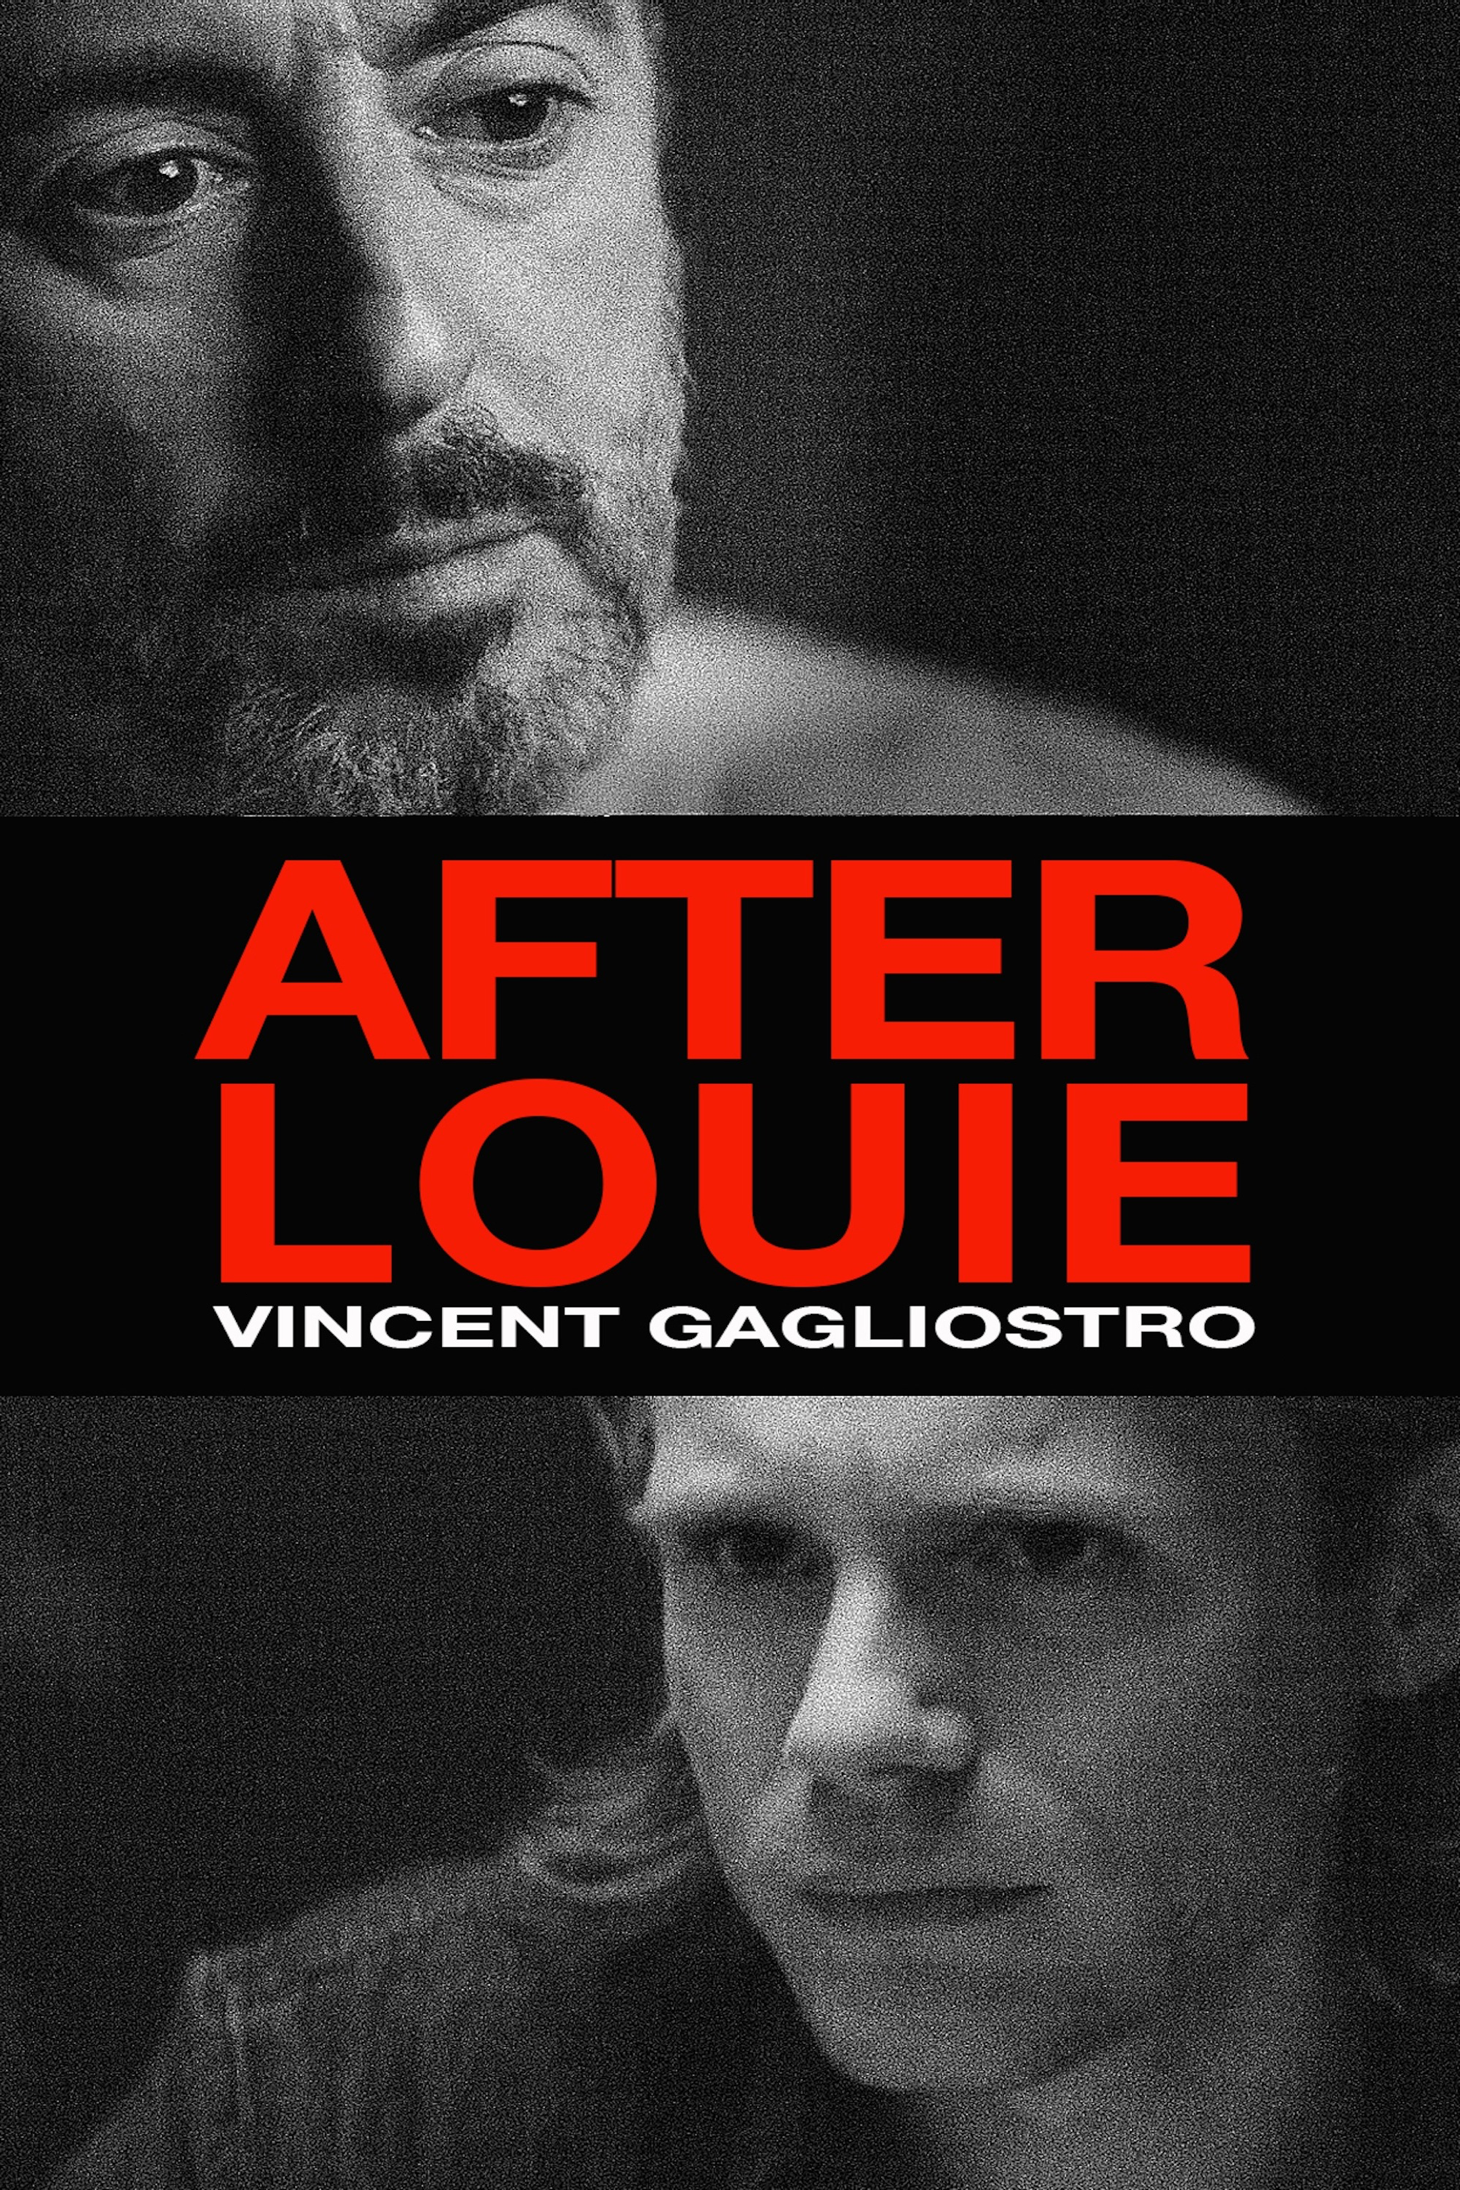 After Louie [Sub-ITA] (2017)